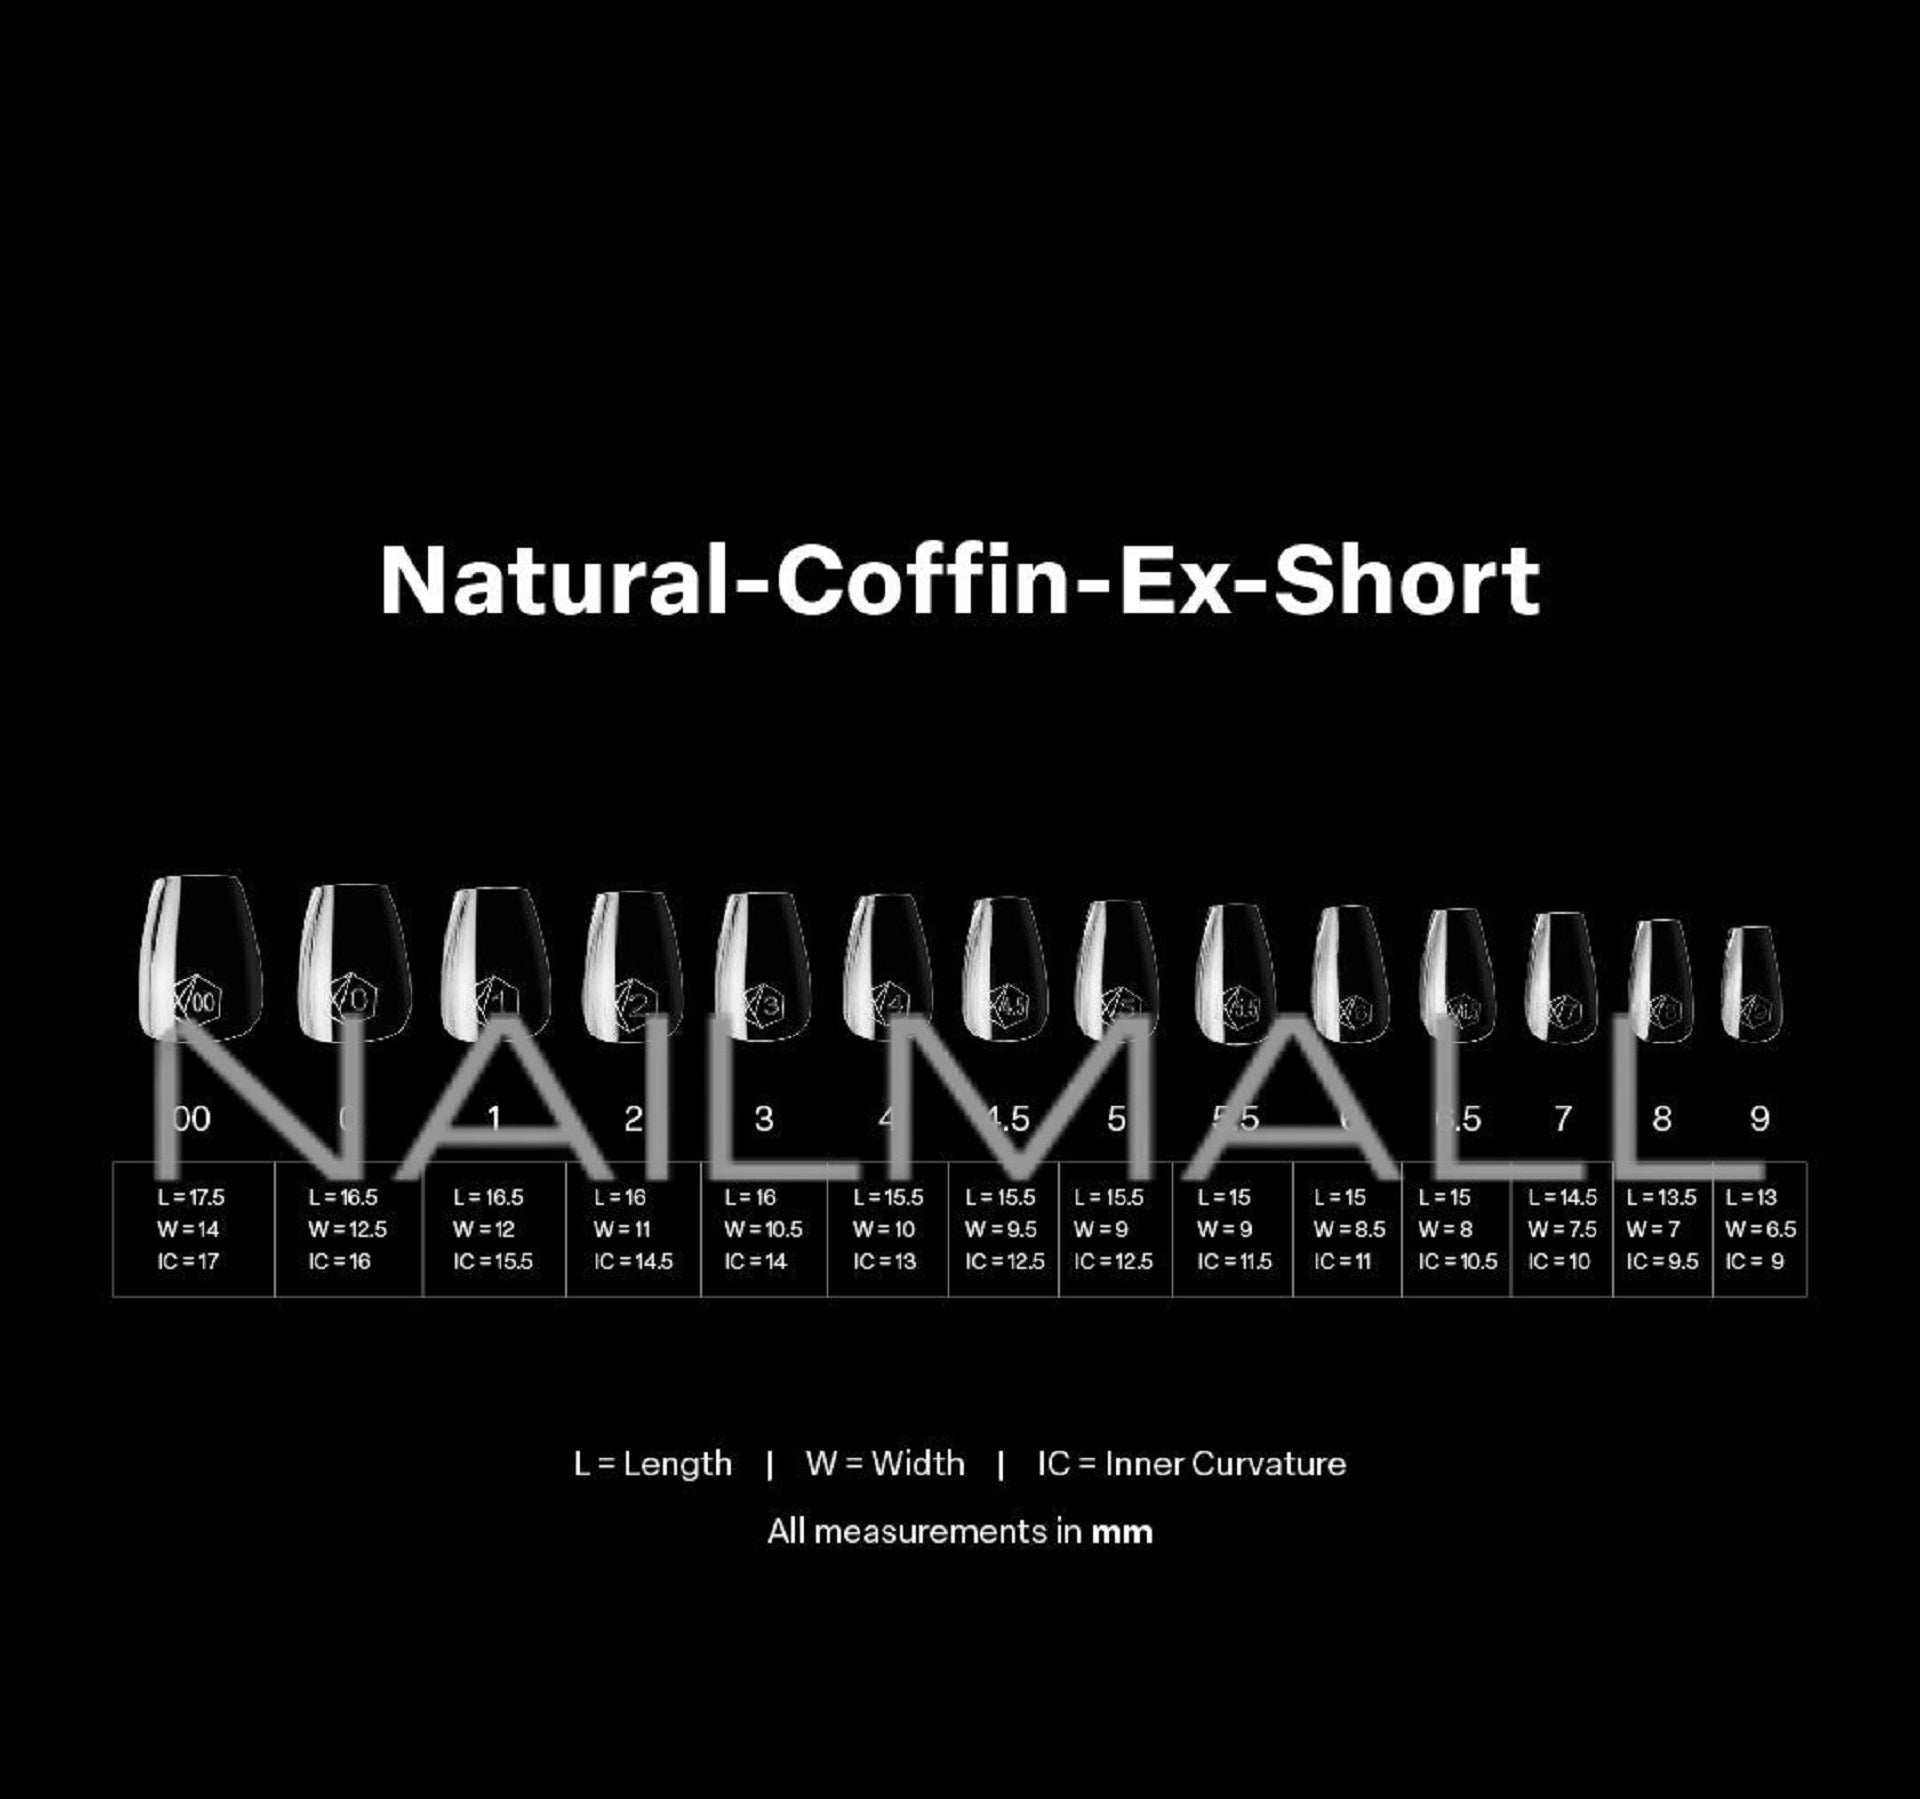 Gel-X Natural Coffin Extra Short 2.0 Box of Tips 14 sizes